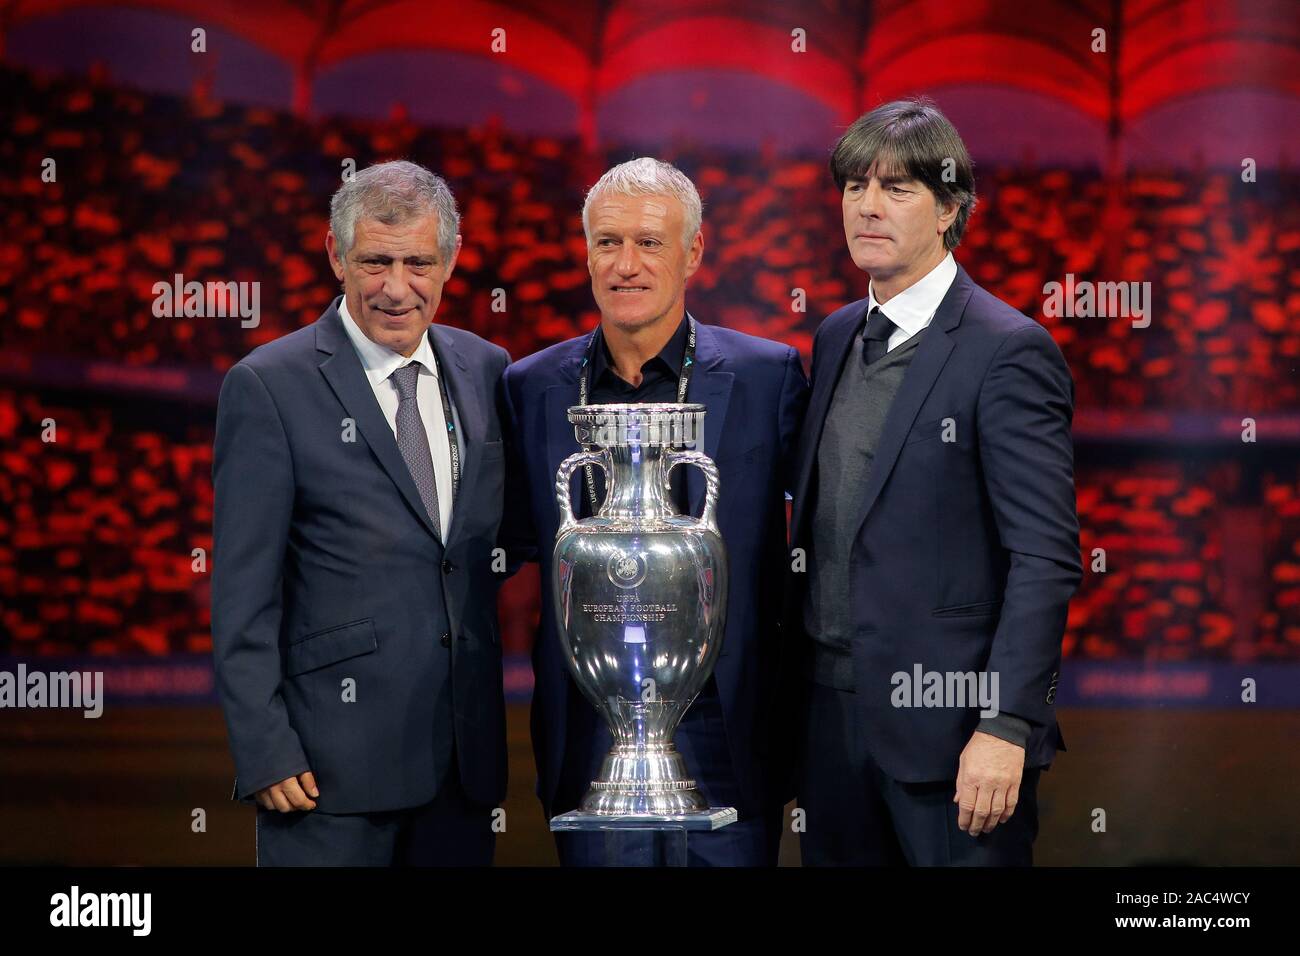 Beijing, Romania. 30th Nov, 2019. (L-R) Head coach of Portugal Fernando Santos, head coach of France Dider Deschamp and head coach of Germany Joachim Loew pose with the trophy during the draw of the UEFA Euro 2020 soccer tournament finals in Bucharest, capital of Romania, Nov. 30, 2019. Credit: Cristian Cristel/Xinhua/Alamy Live News Stock Photo